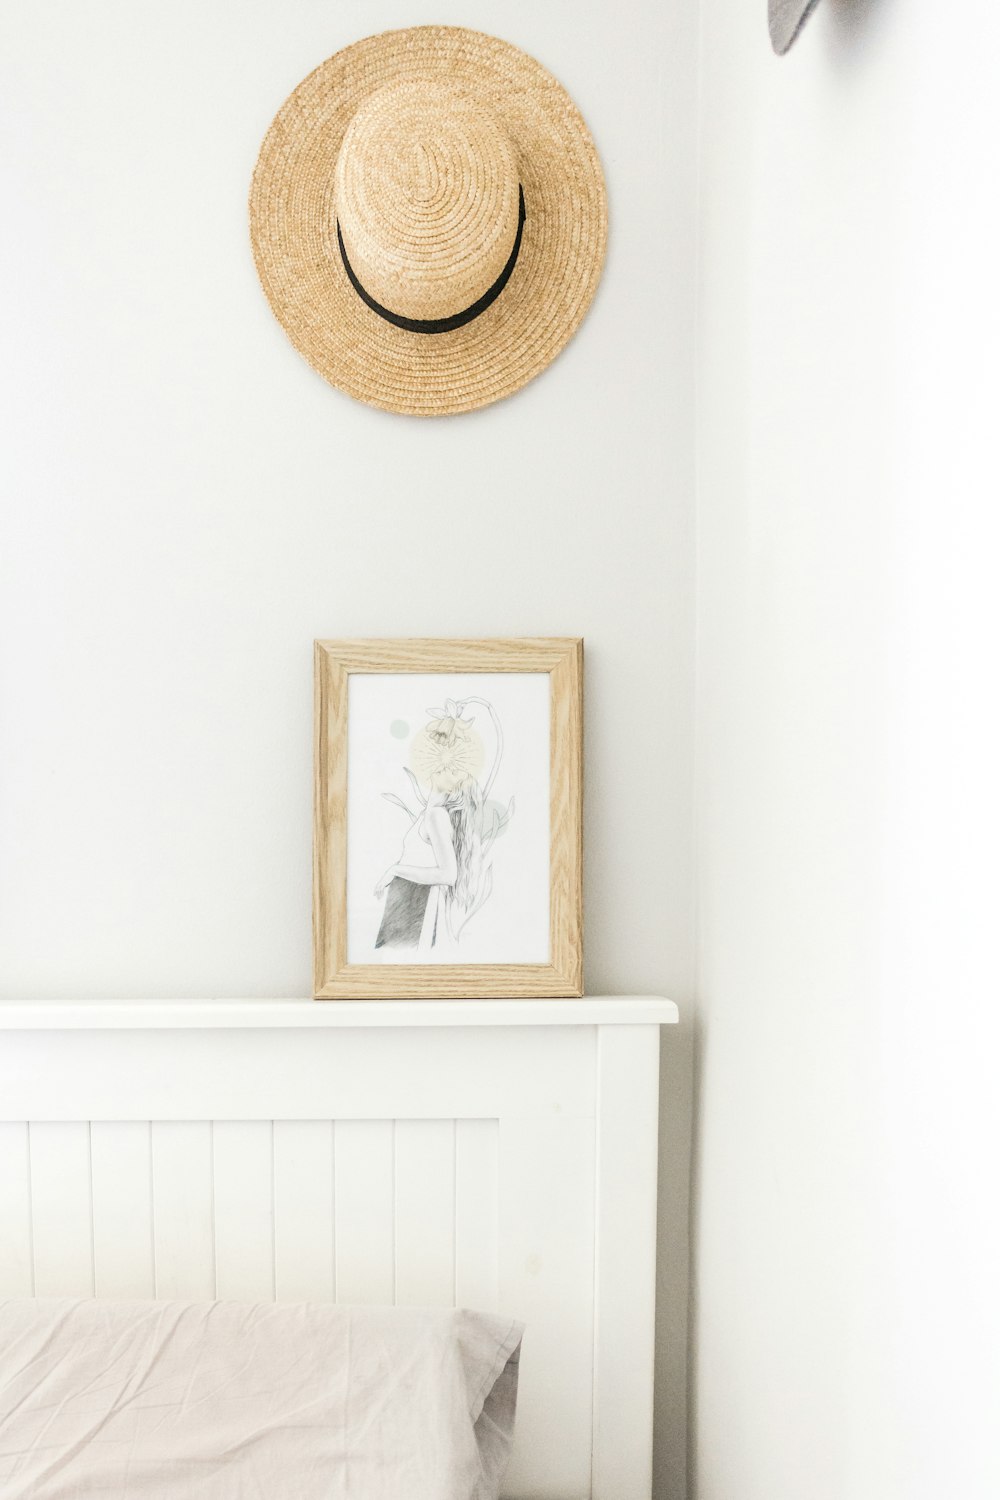 beige sun hat near abstract painting with brown frame beside wall